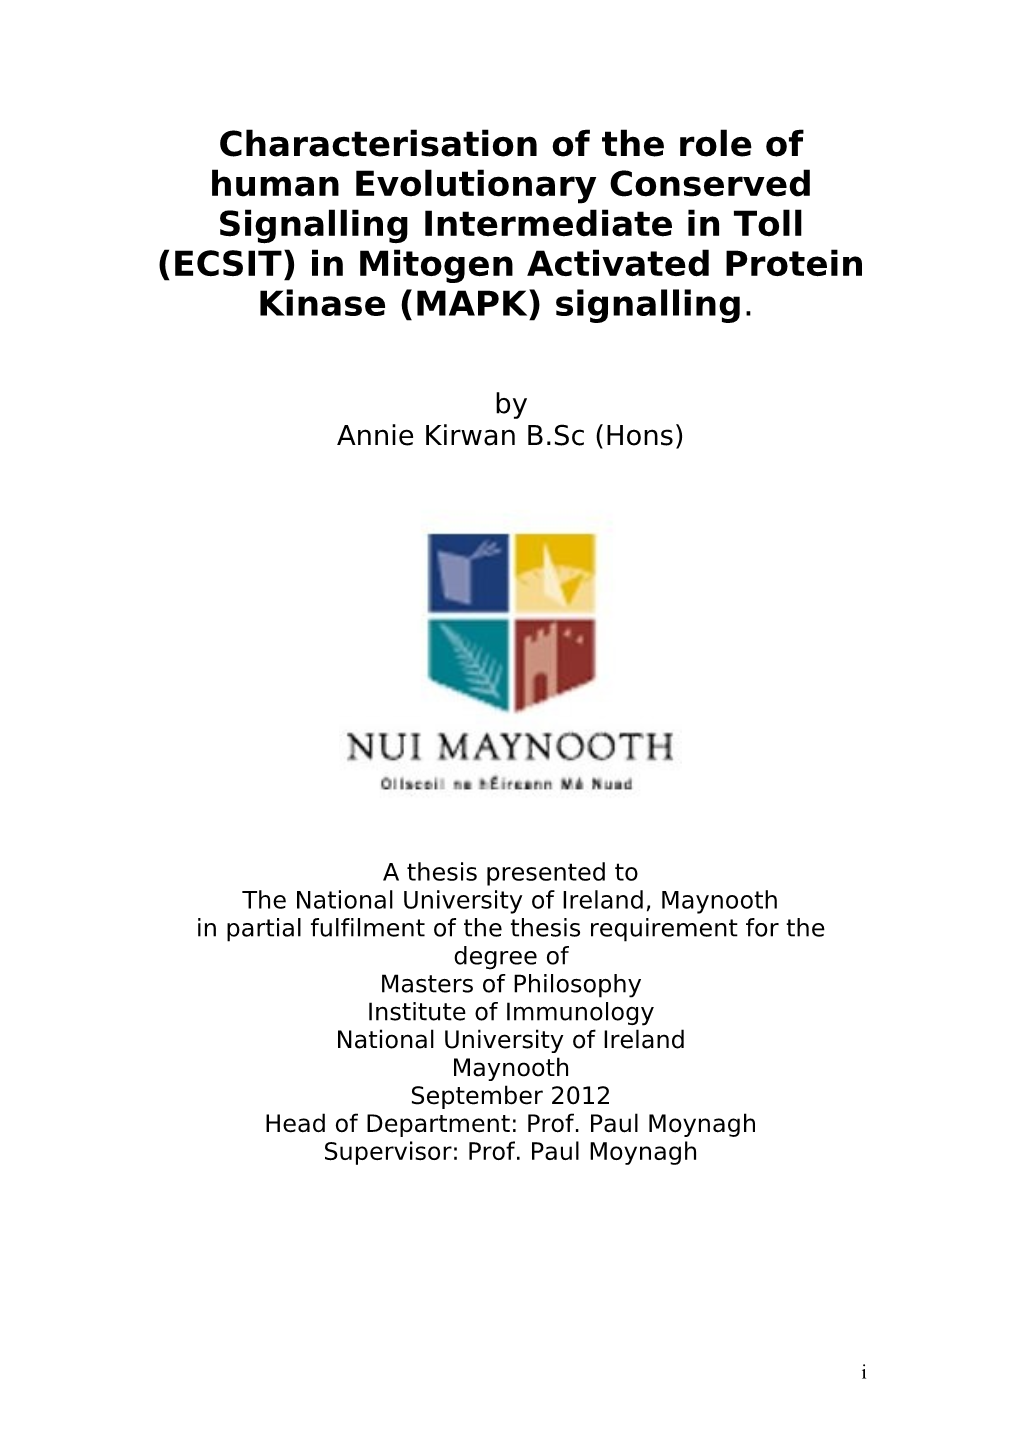 (ECSIT) in Mitogen Activated Protein Kinase (MAPK) Signalling